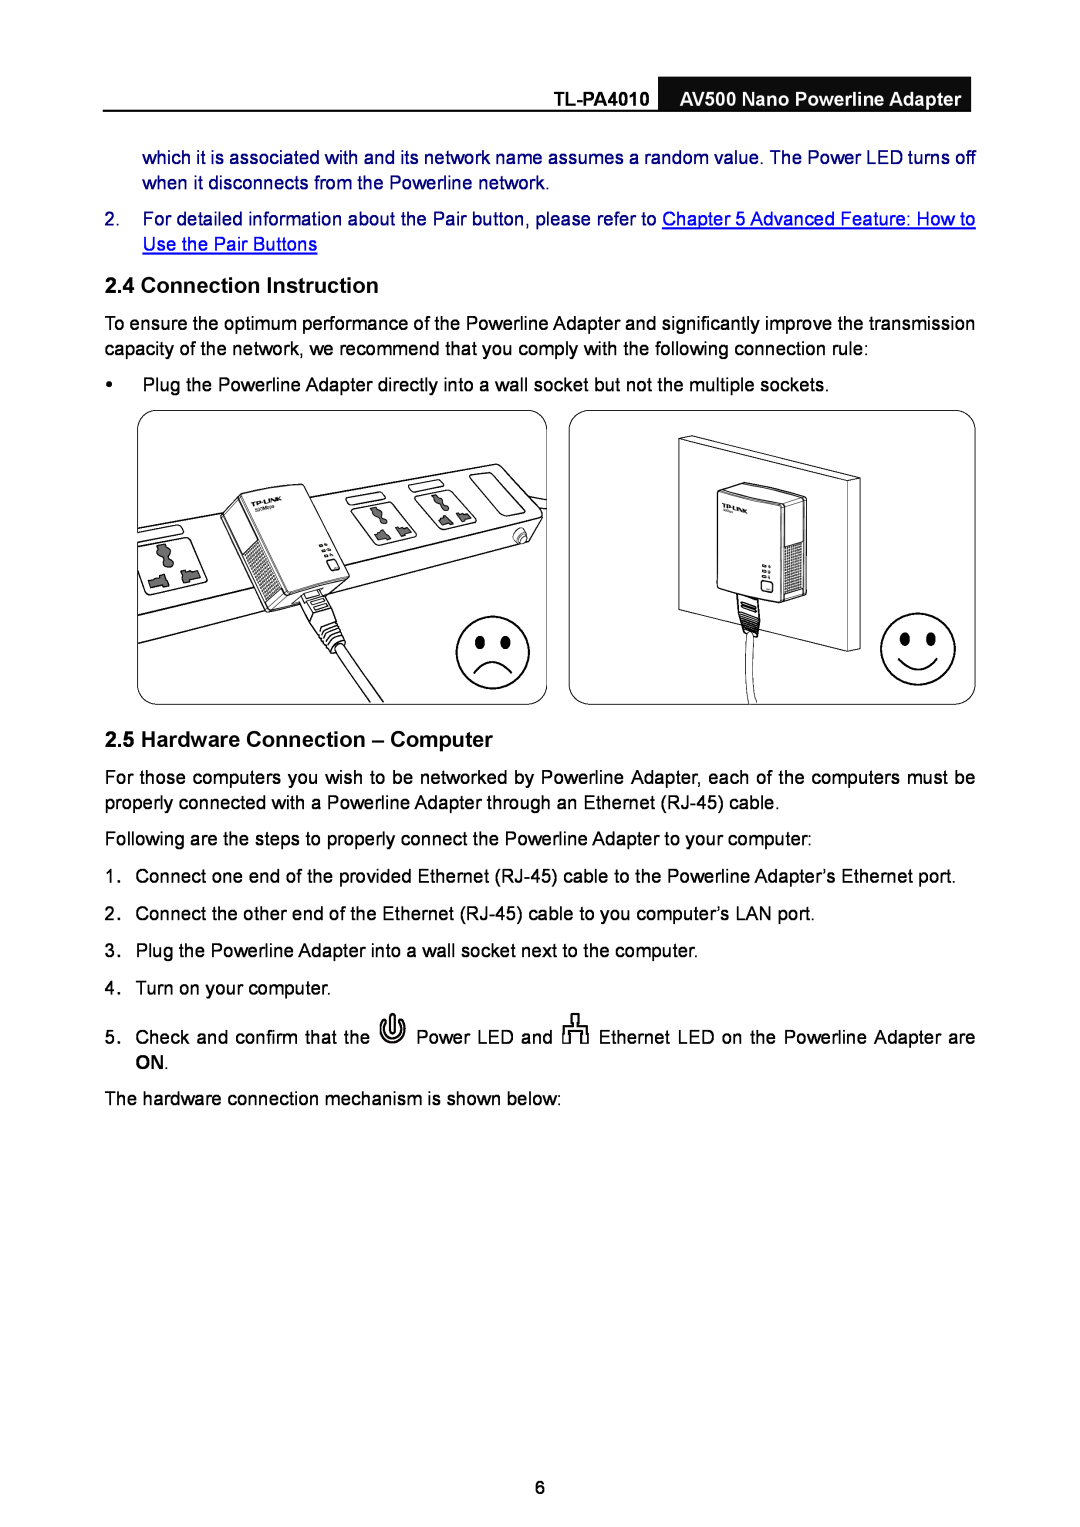 TP-Link manual Connection Instruction, Hardware Connection - Computer, TL-PA4010 AV500 Nano Powerline Adapter 